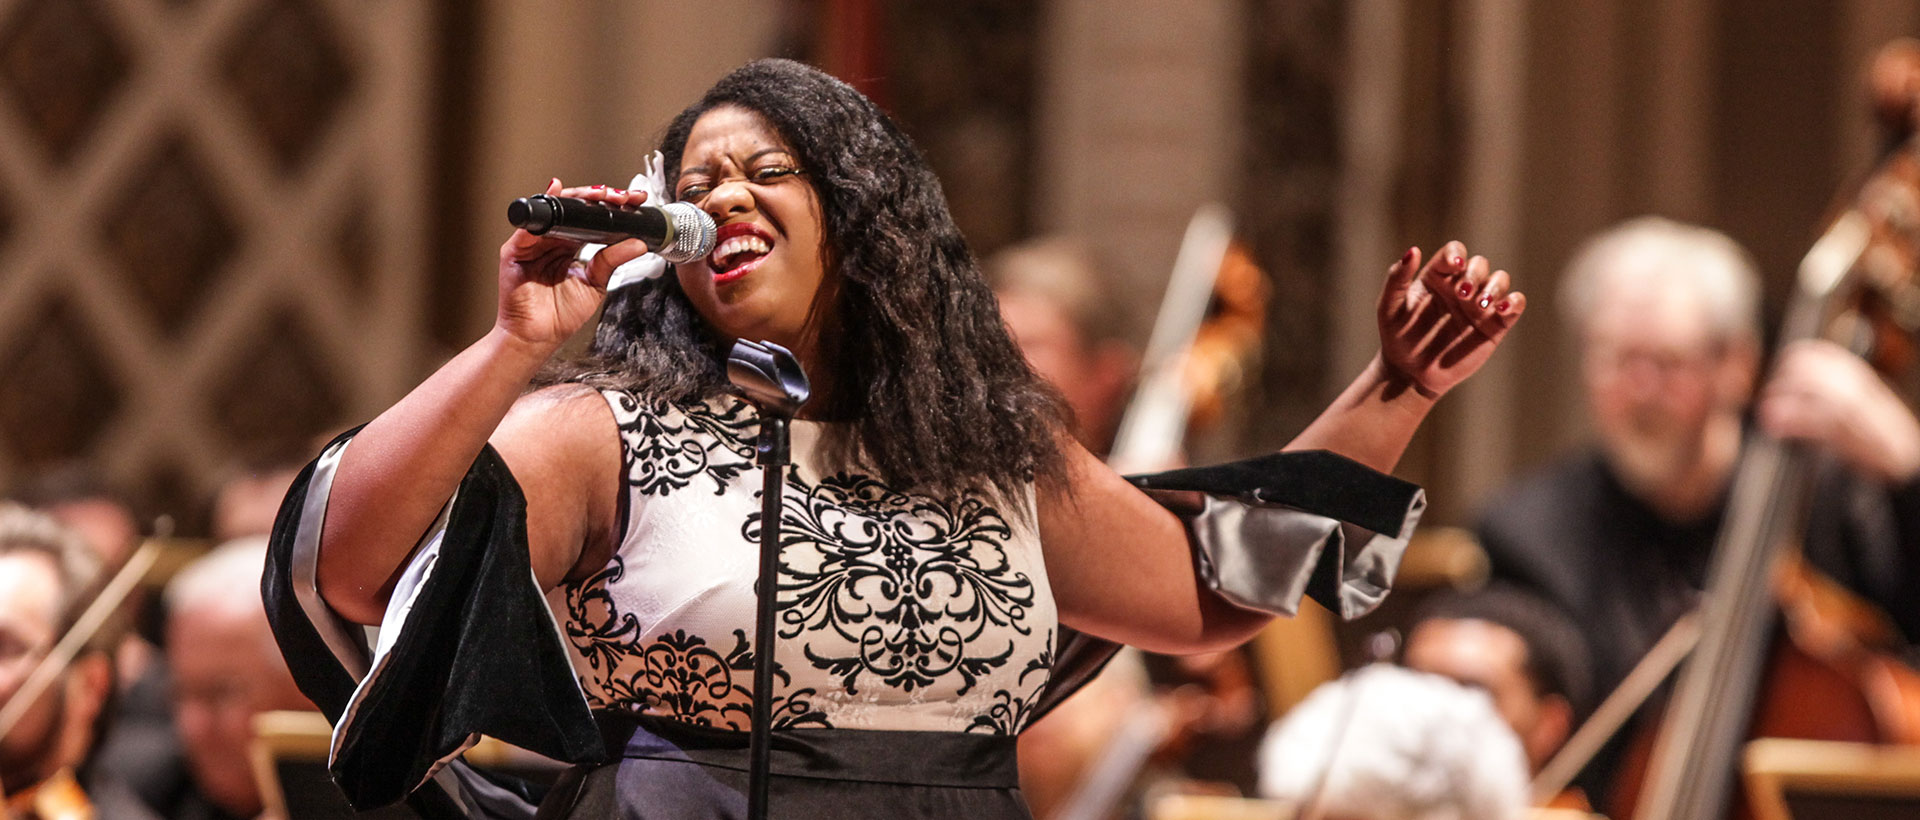 A female vocalist performs a song at a Classical Roots concert